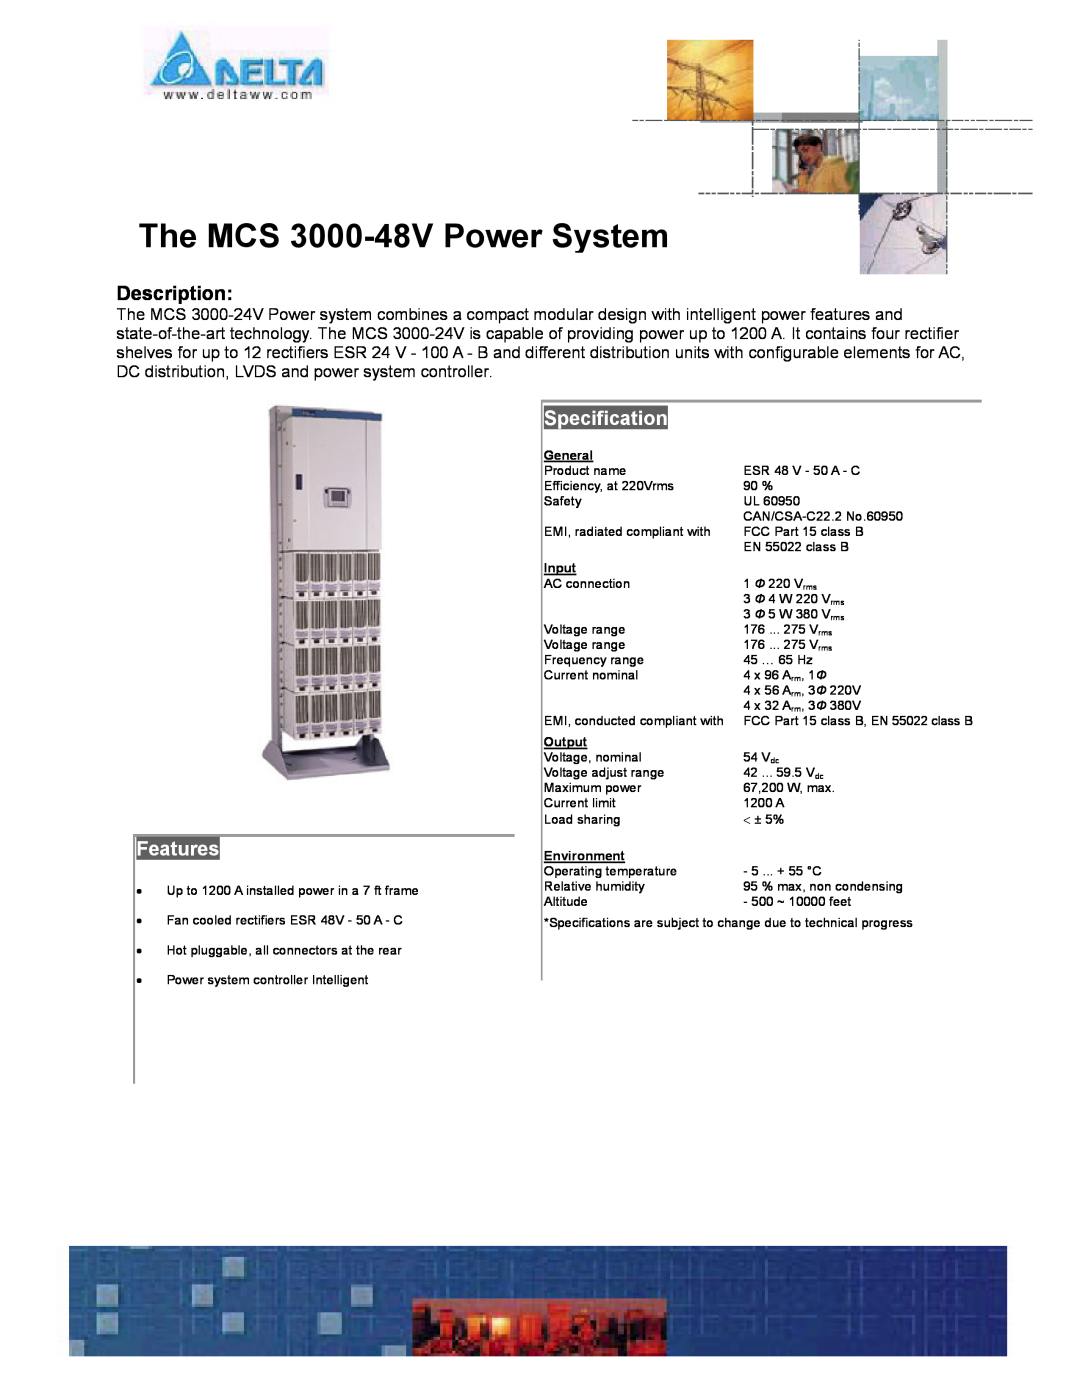 Delta manual The MCS 3000-48V Power System, Description, Features, Specification, General, Input, Output, Environment 